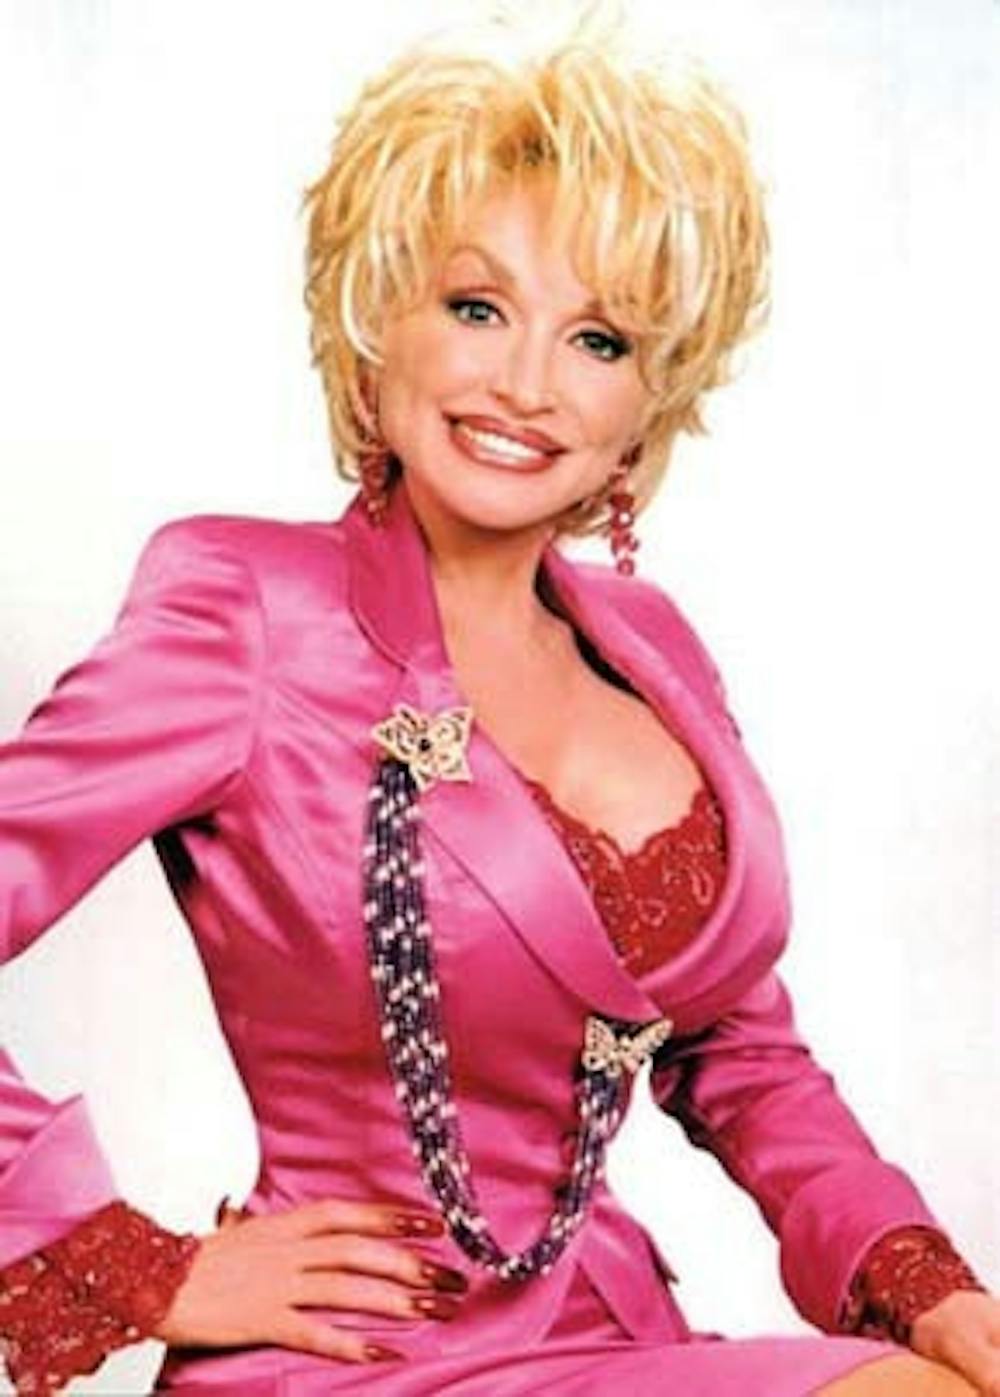 After all these years, Dolly Parton's still got huge... tracts of land.